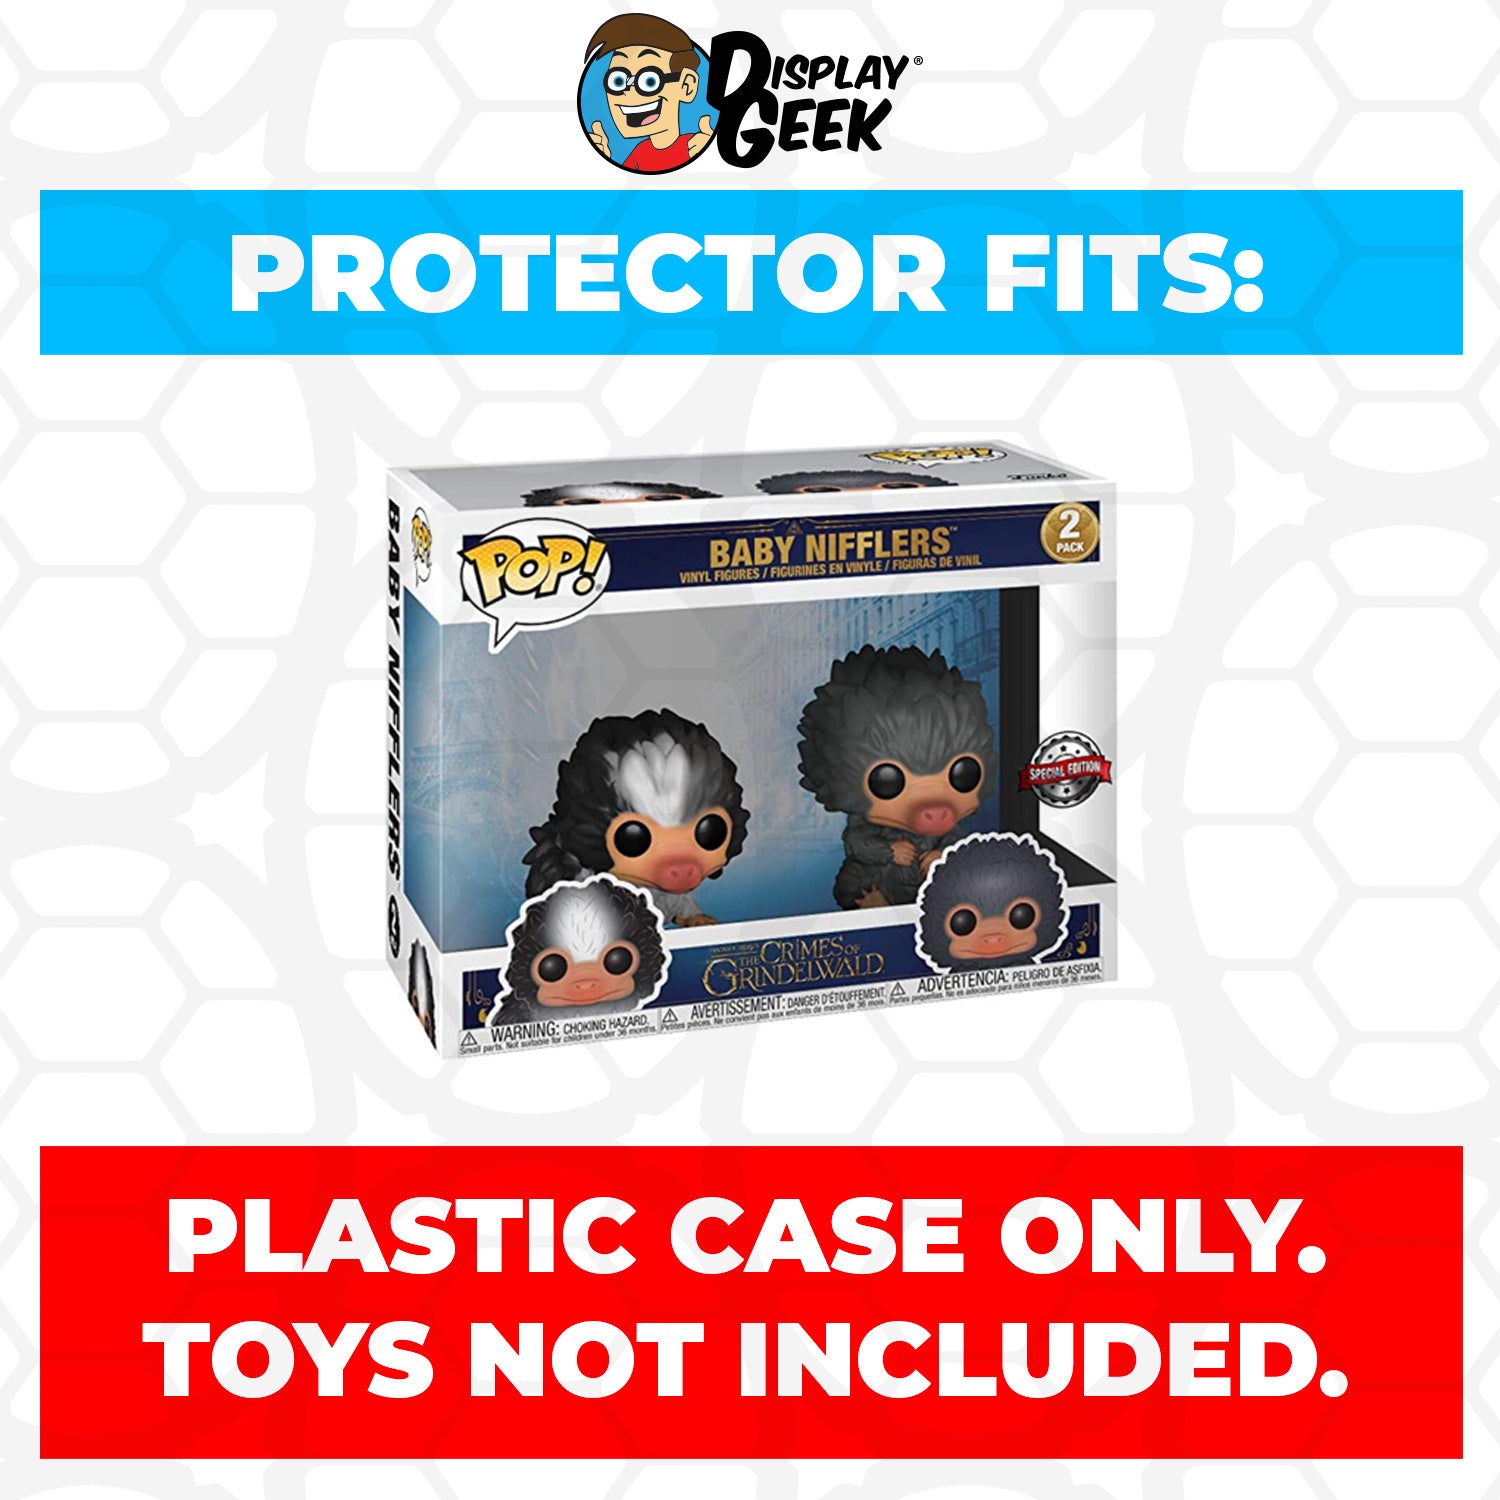 Pop Protector for 2 Pack Baby Nifflers Black & Gray Funko Pop - PPG Pop Protector Guide Search Created by Display Geek